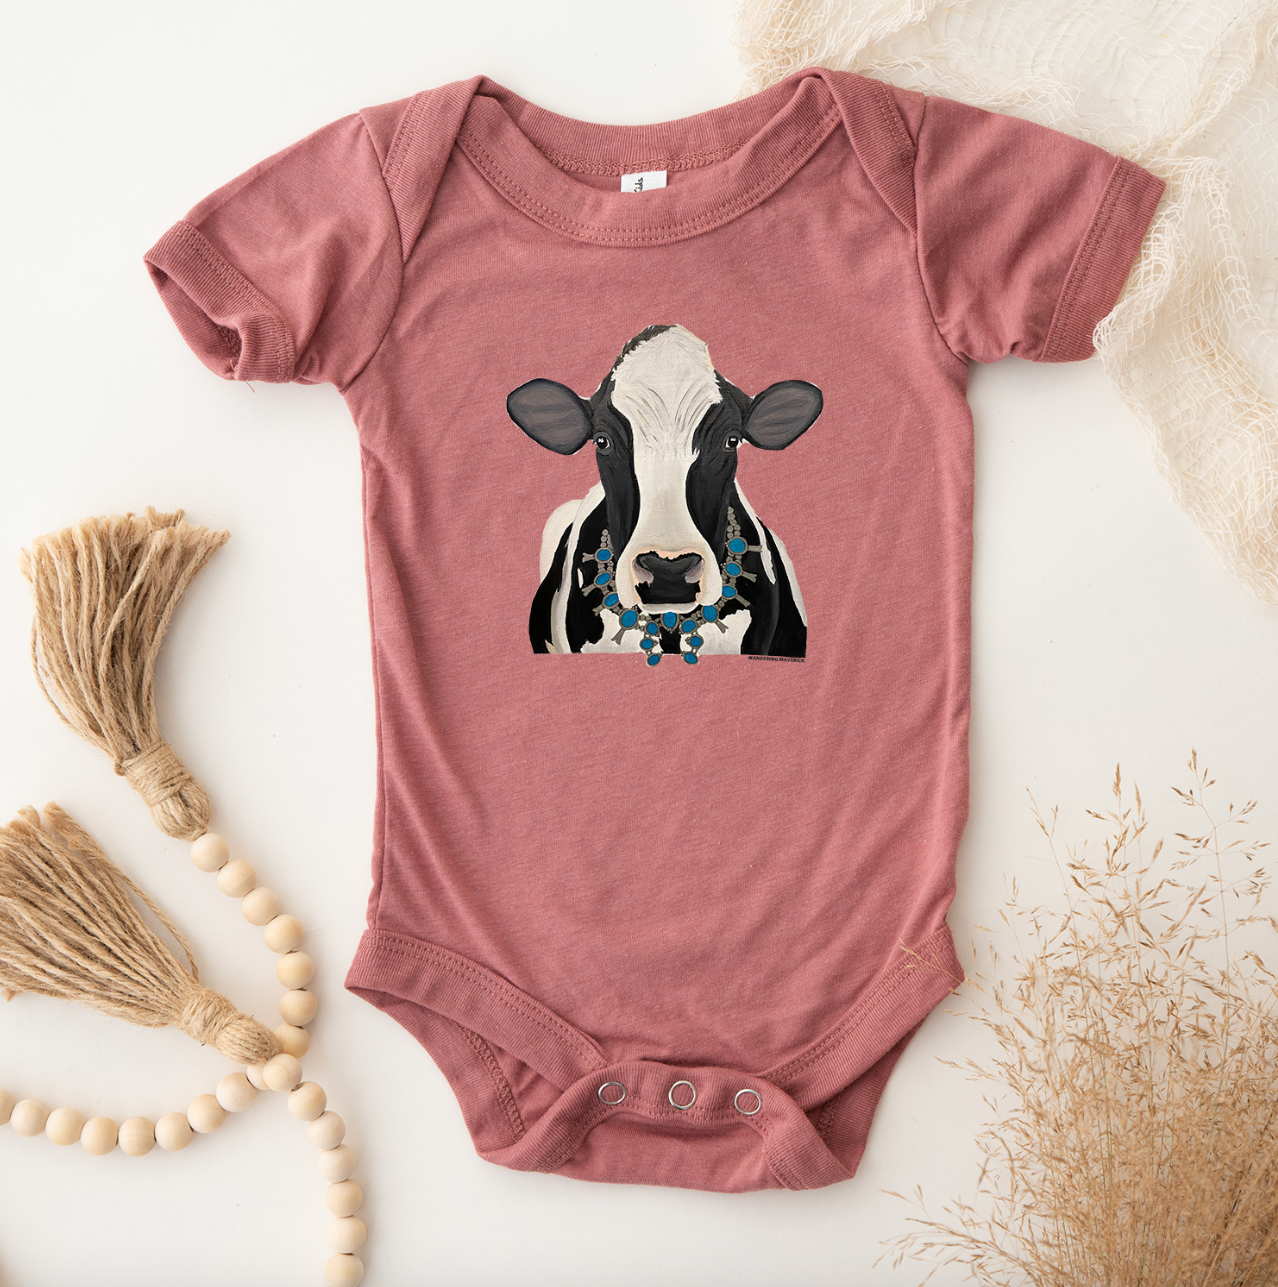 Holstein Squash Blossom One Piece/T-Shirt (Newborn - Youth XL) - Multiple Colors!